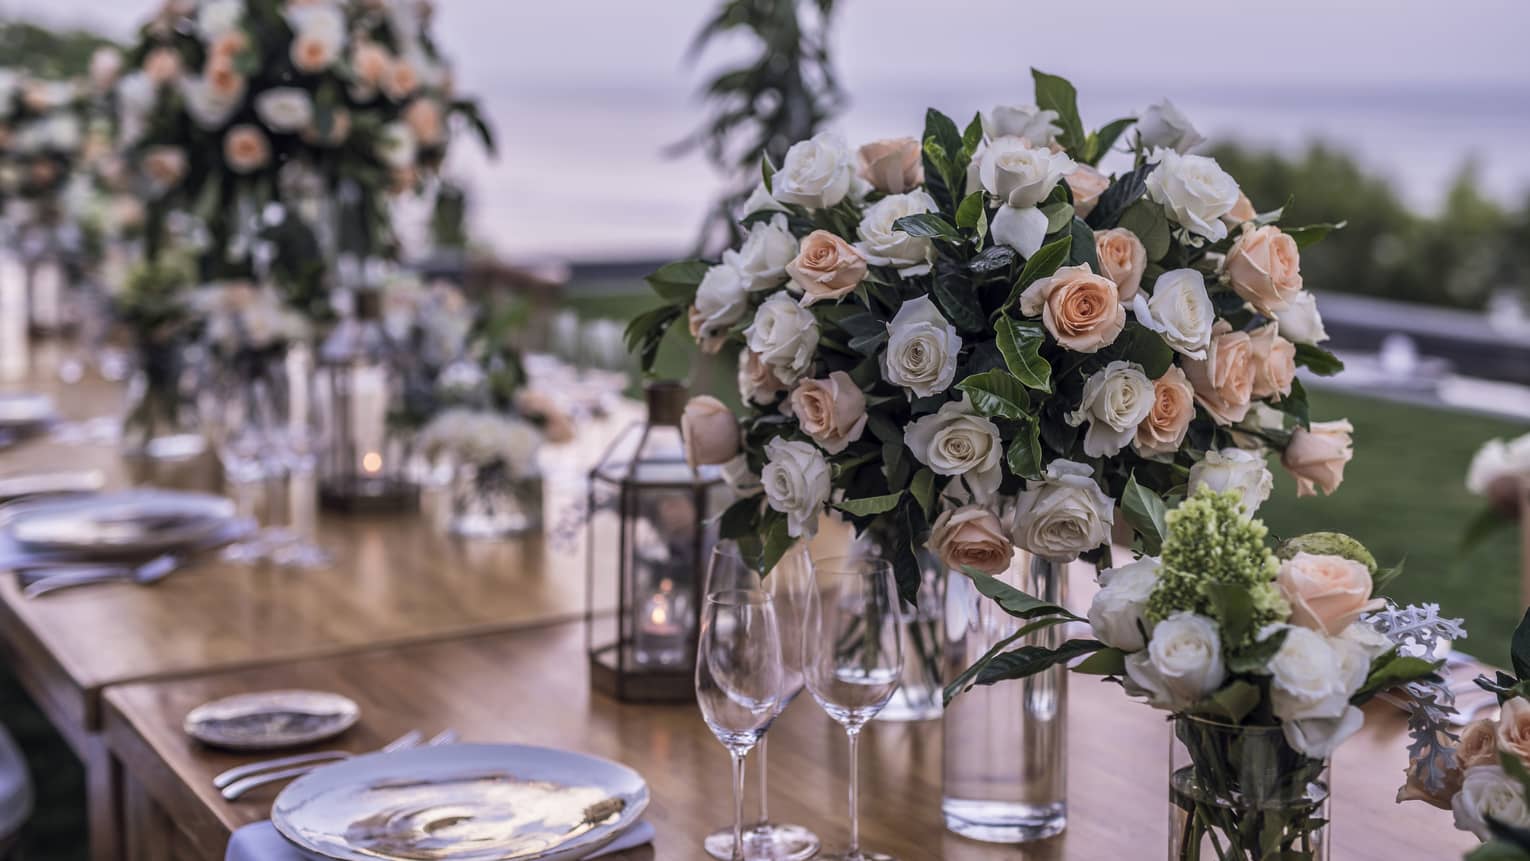 Pink and white roses in vases on long dining table at outdoor wedding reception